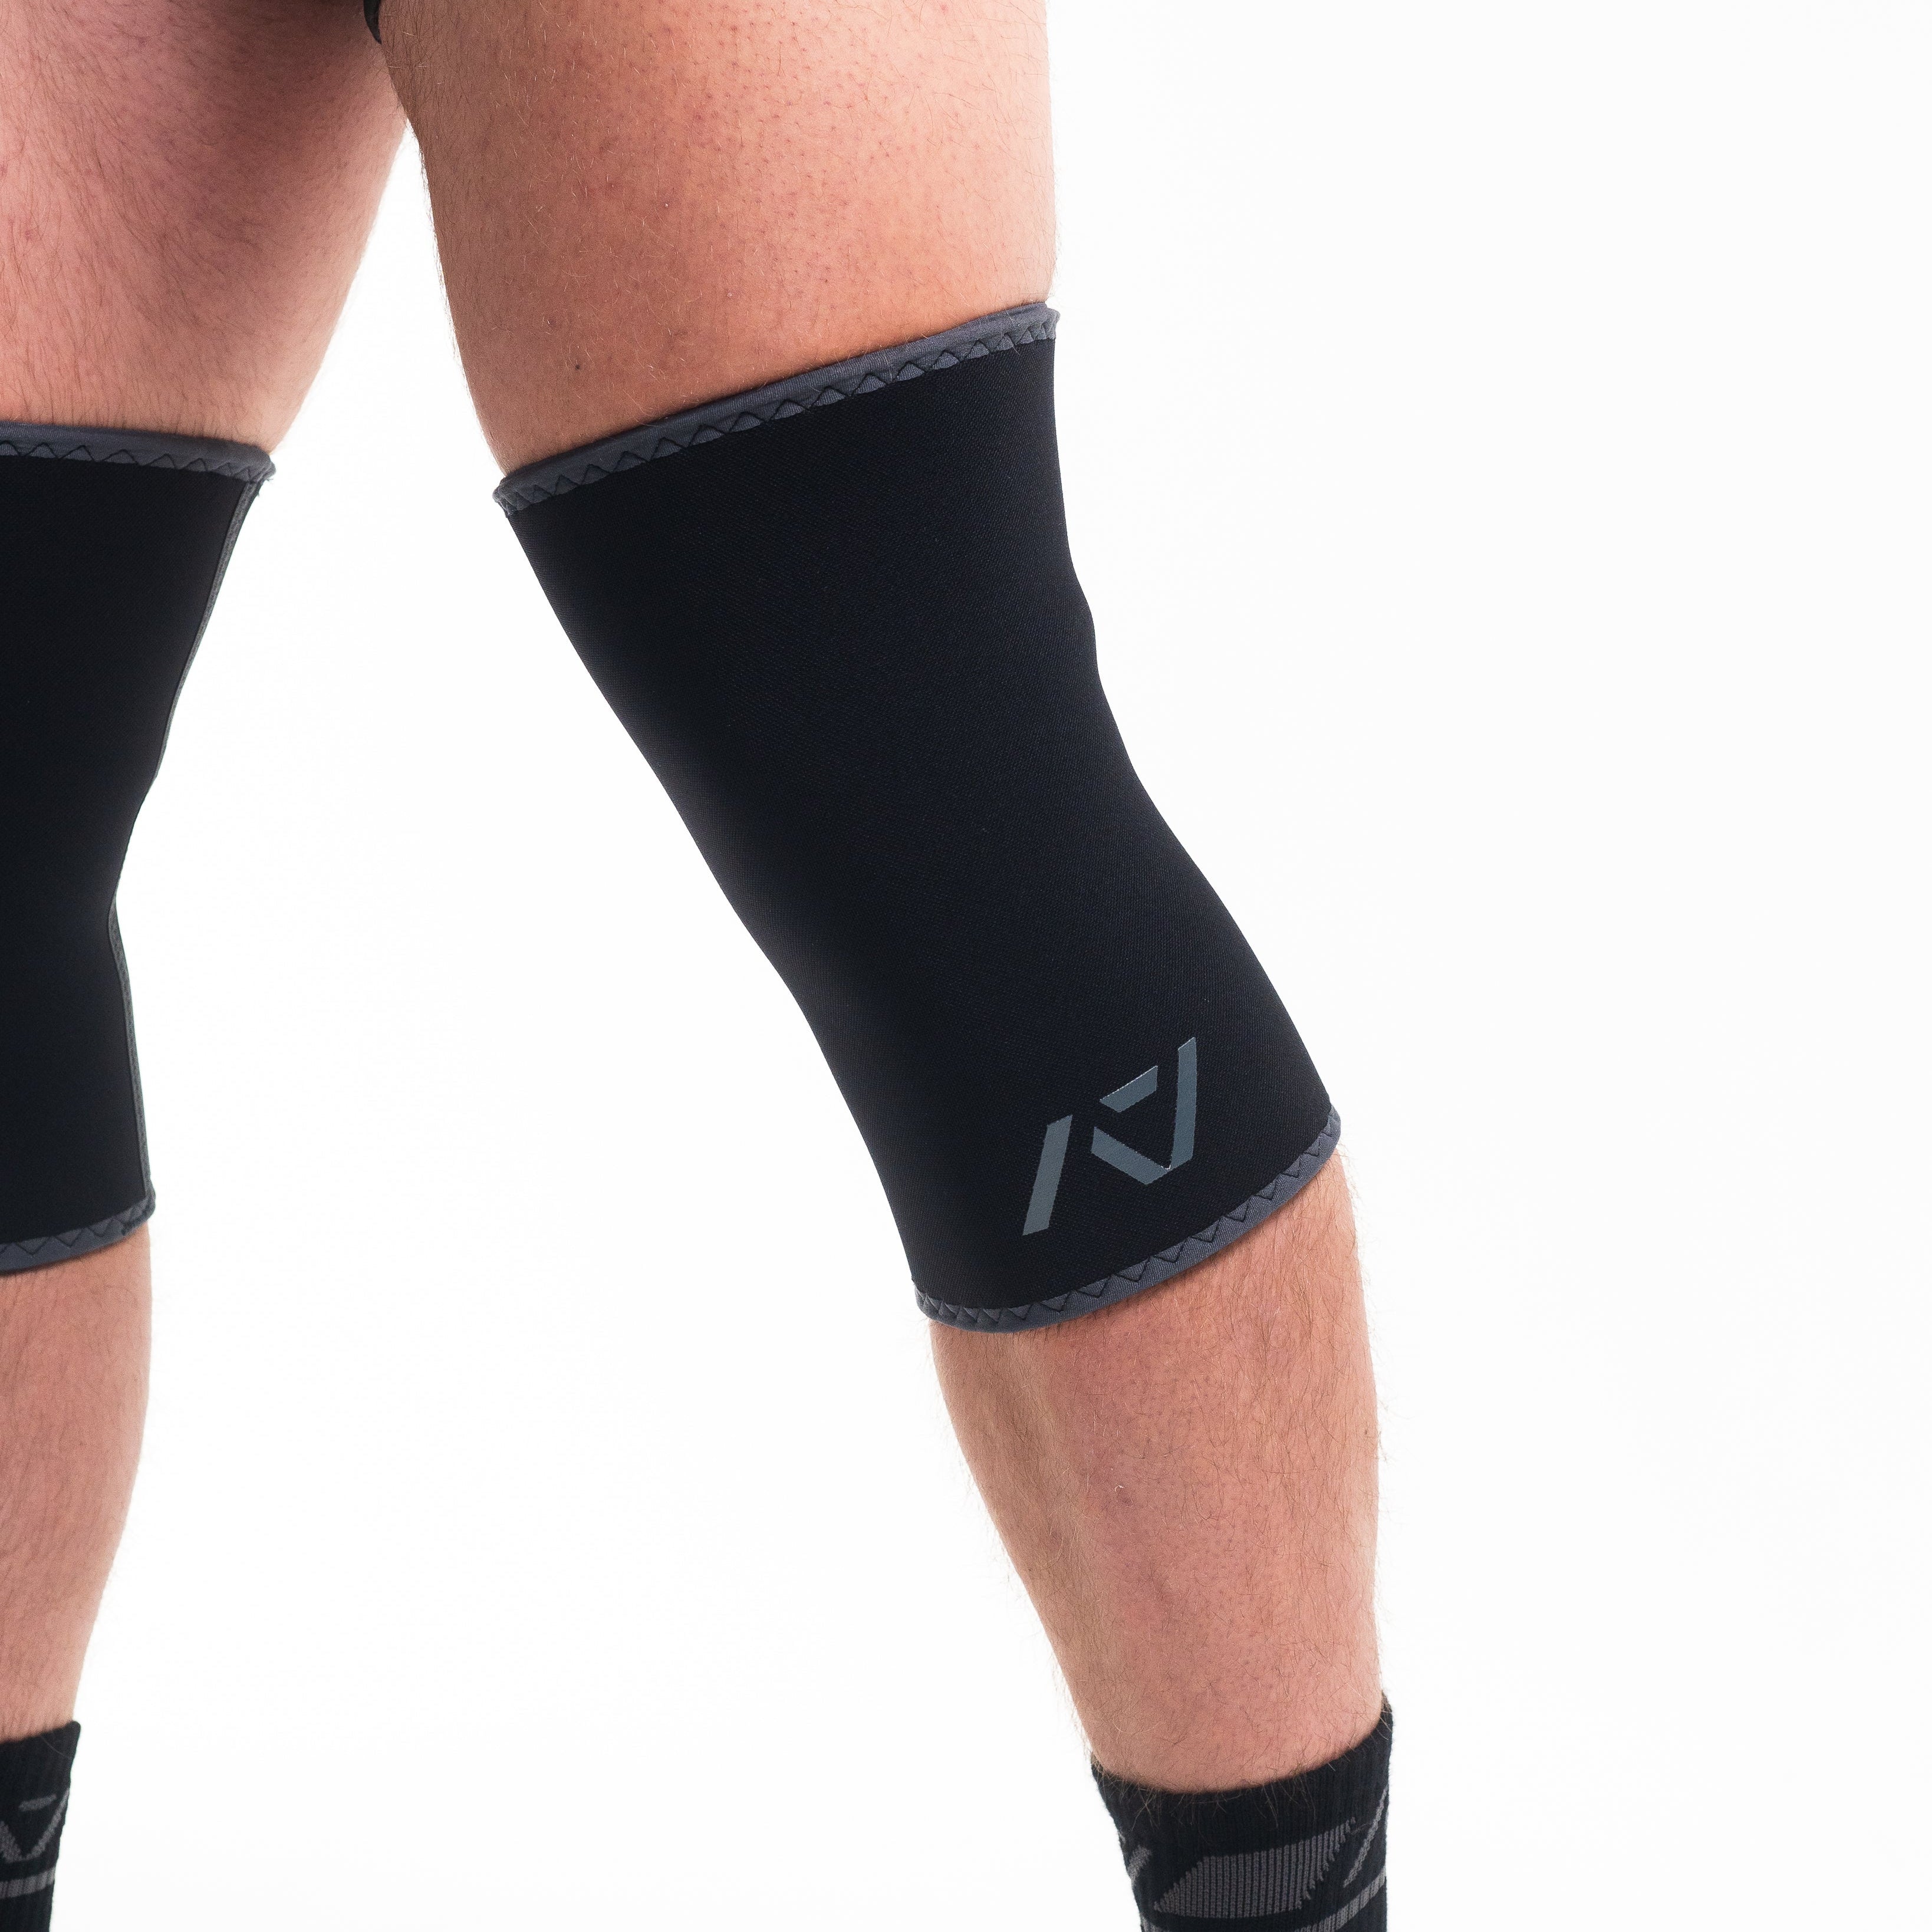 A7 IPF Approved Hourglass Knee Sleeves feature an hourglass-shaped taper fit to provide knee compression while maintaining proper tightness around the calf and quad, offered in three stiffnesses (Flexi, Stiff and Rigor Mortis). The IPF Approved Kit includes Powerlifting Singlet, A7 Meet Shirt, A7 Zebra Wrist Wraps, A7 Deadlift Socks, Hourglass Knee, IPF Approved PAL Lever. Genouillères powerlifting shipping to France, Spain, Ireland, Germany, Italy, Sweden and EU. 